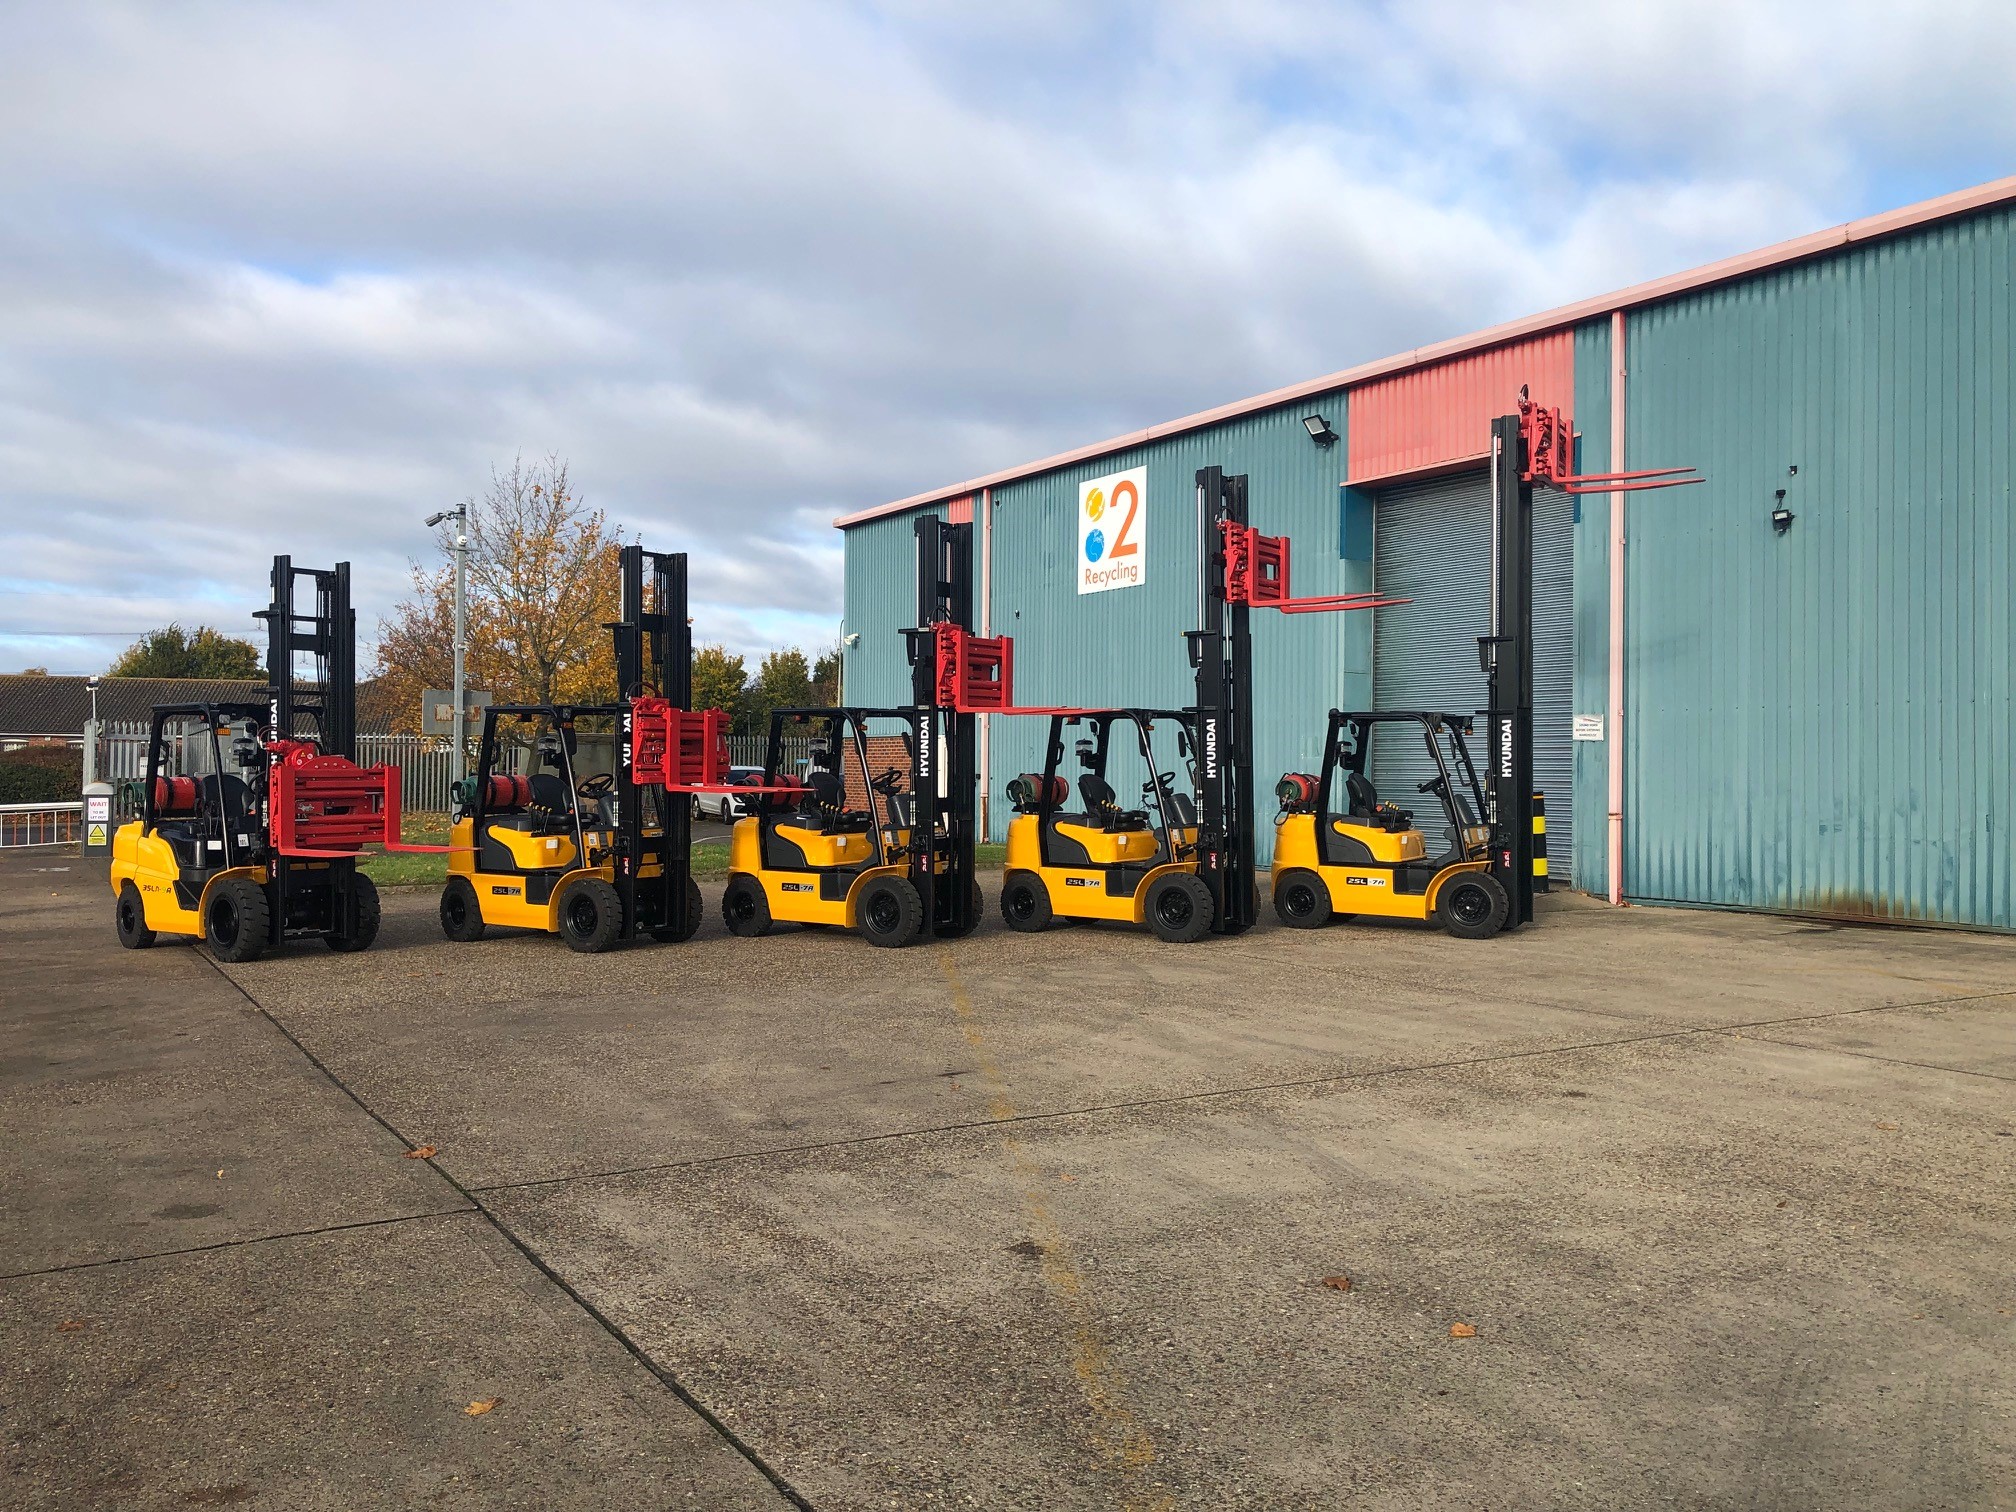 2 Recycling new Forklifts